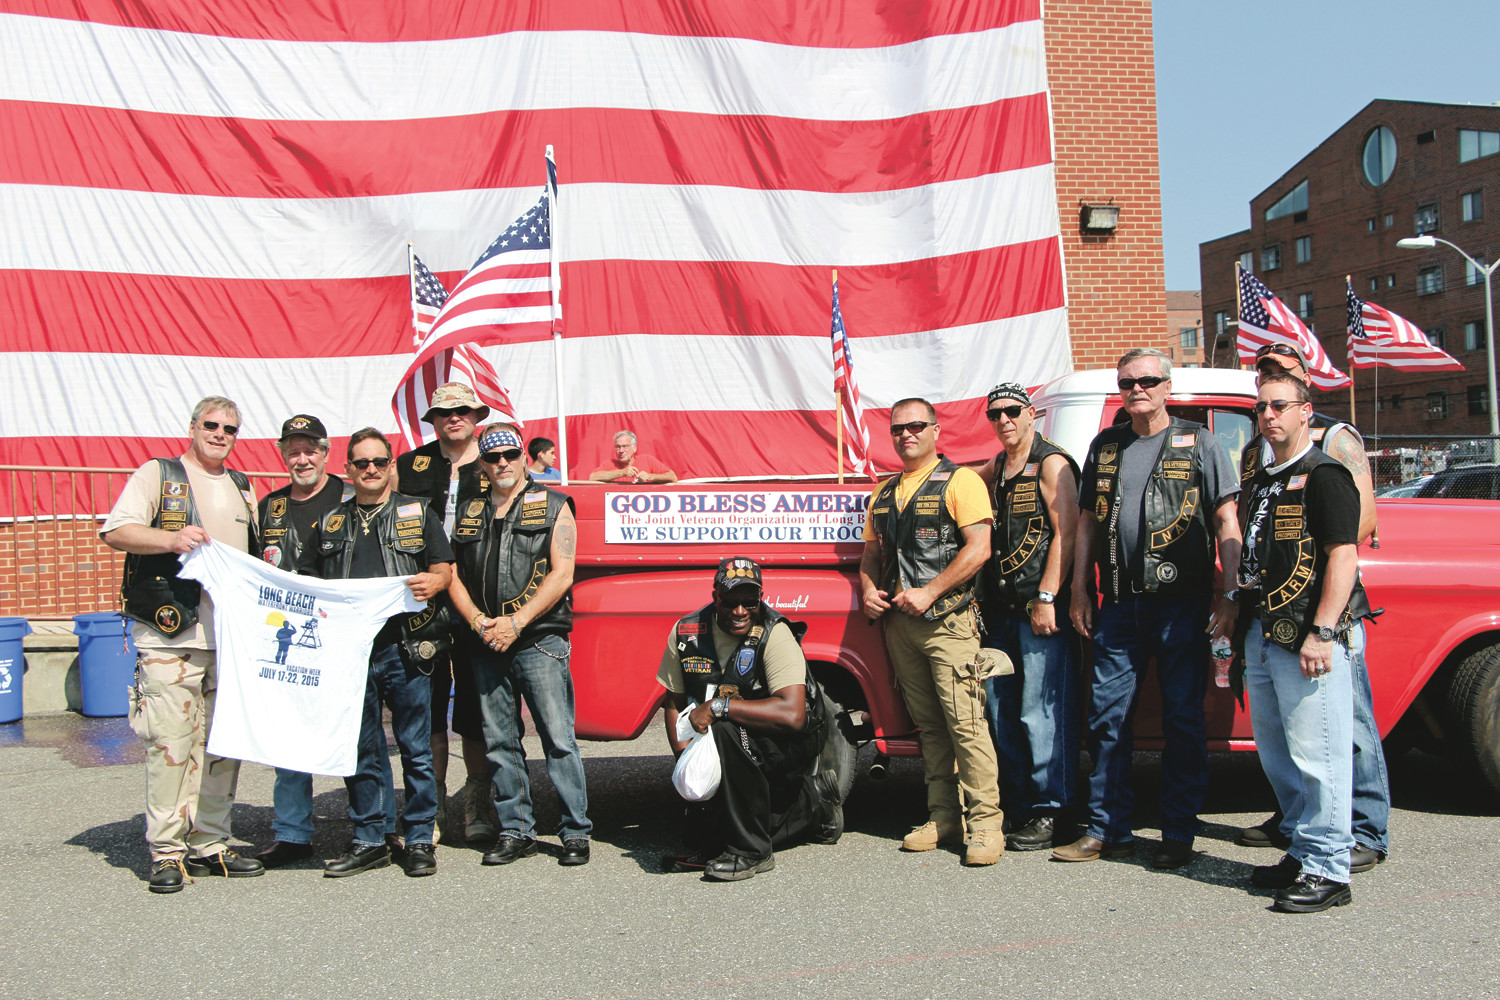 New York State Motorcycle Club veterans from various towns on Long Island rode their bikes in the parade.